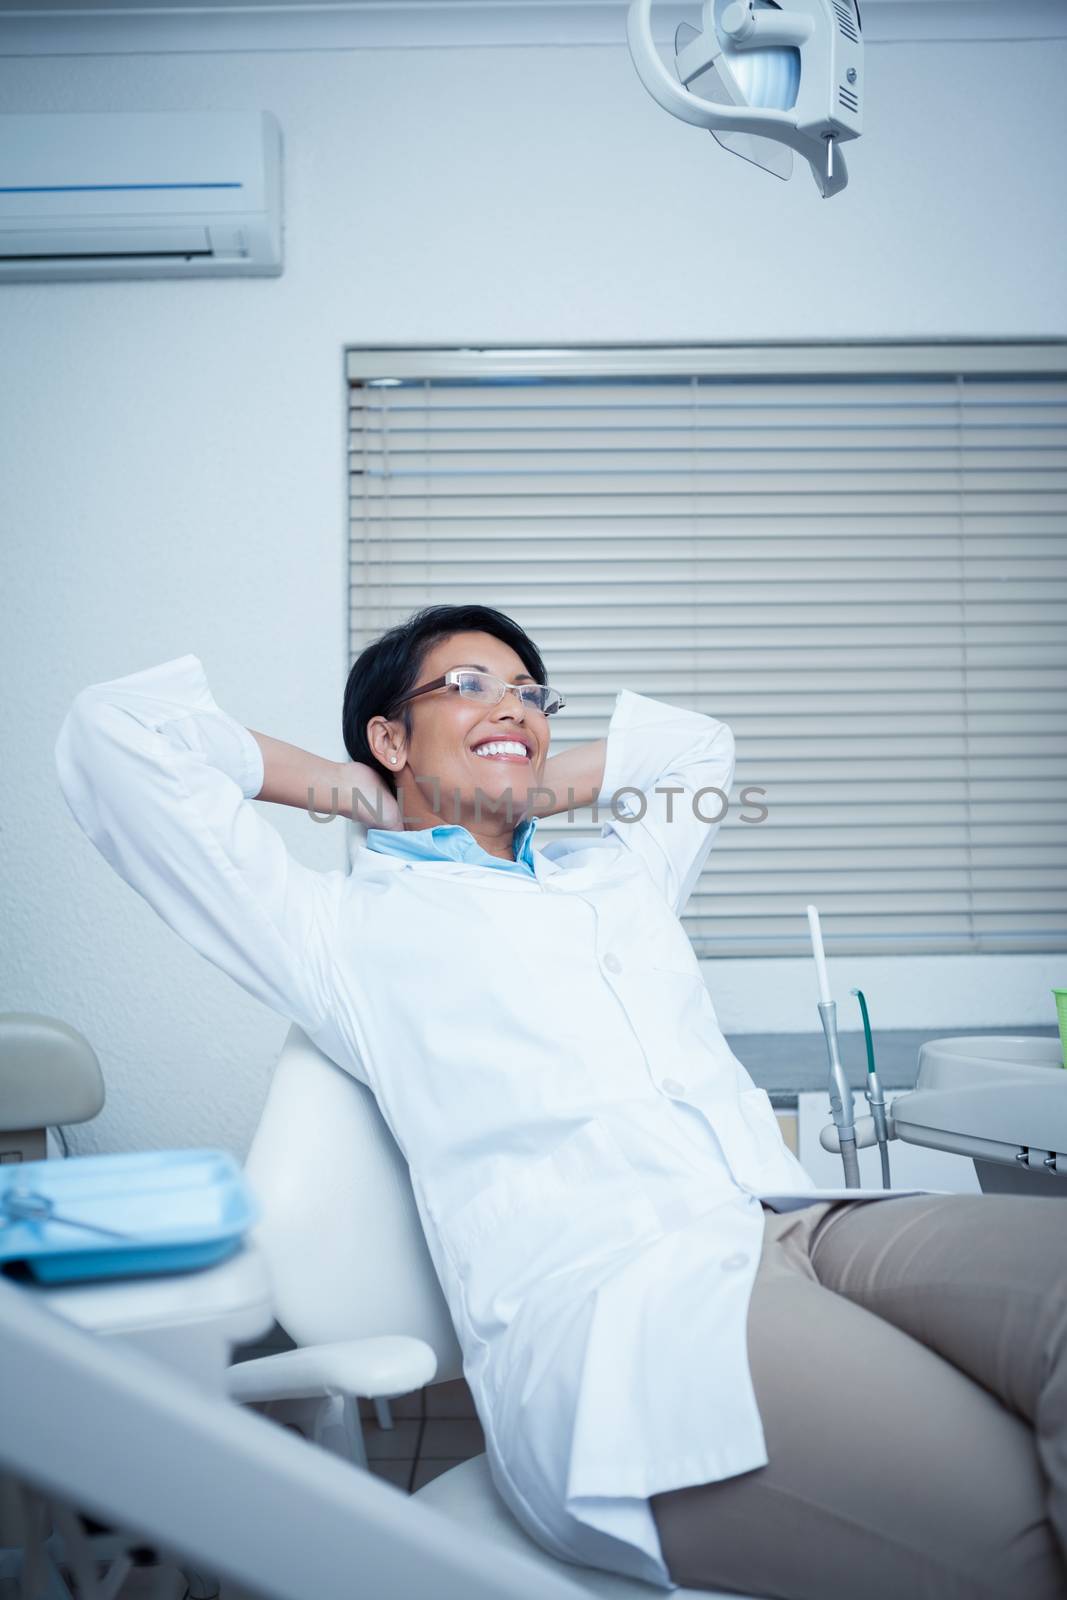 Relaxed smiling female dentist sitting on chair with hands behind head